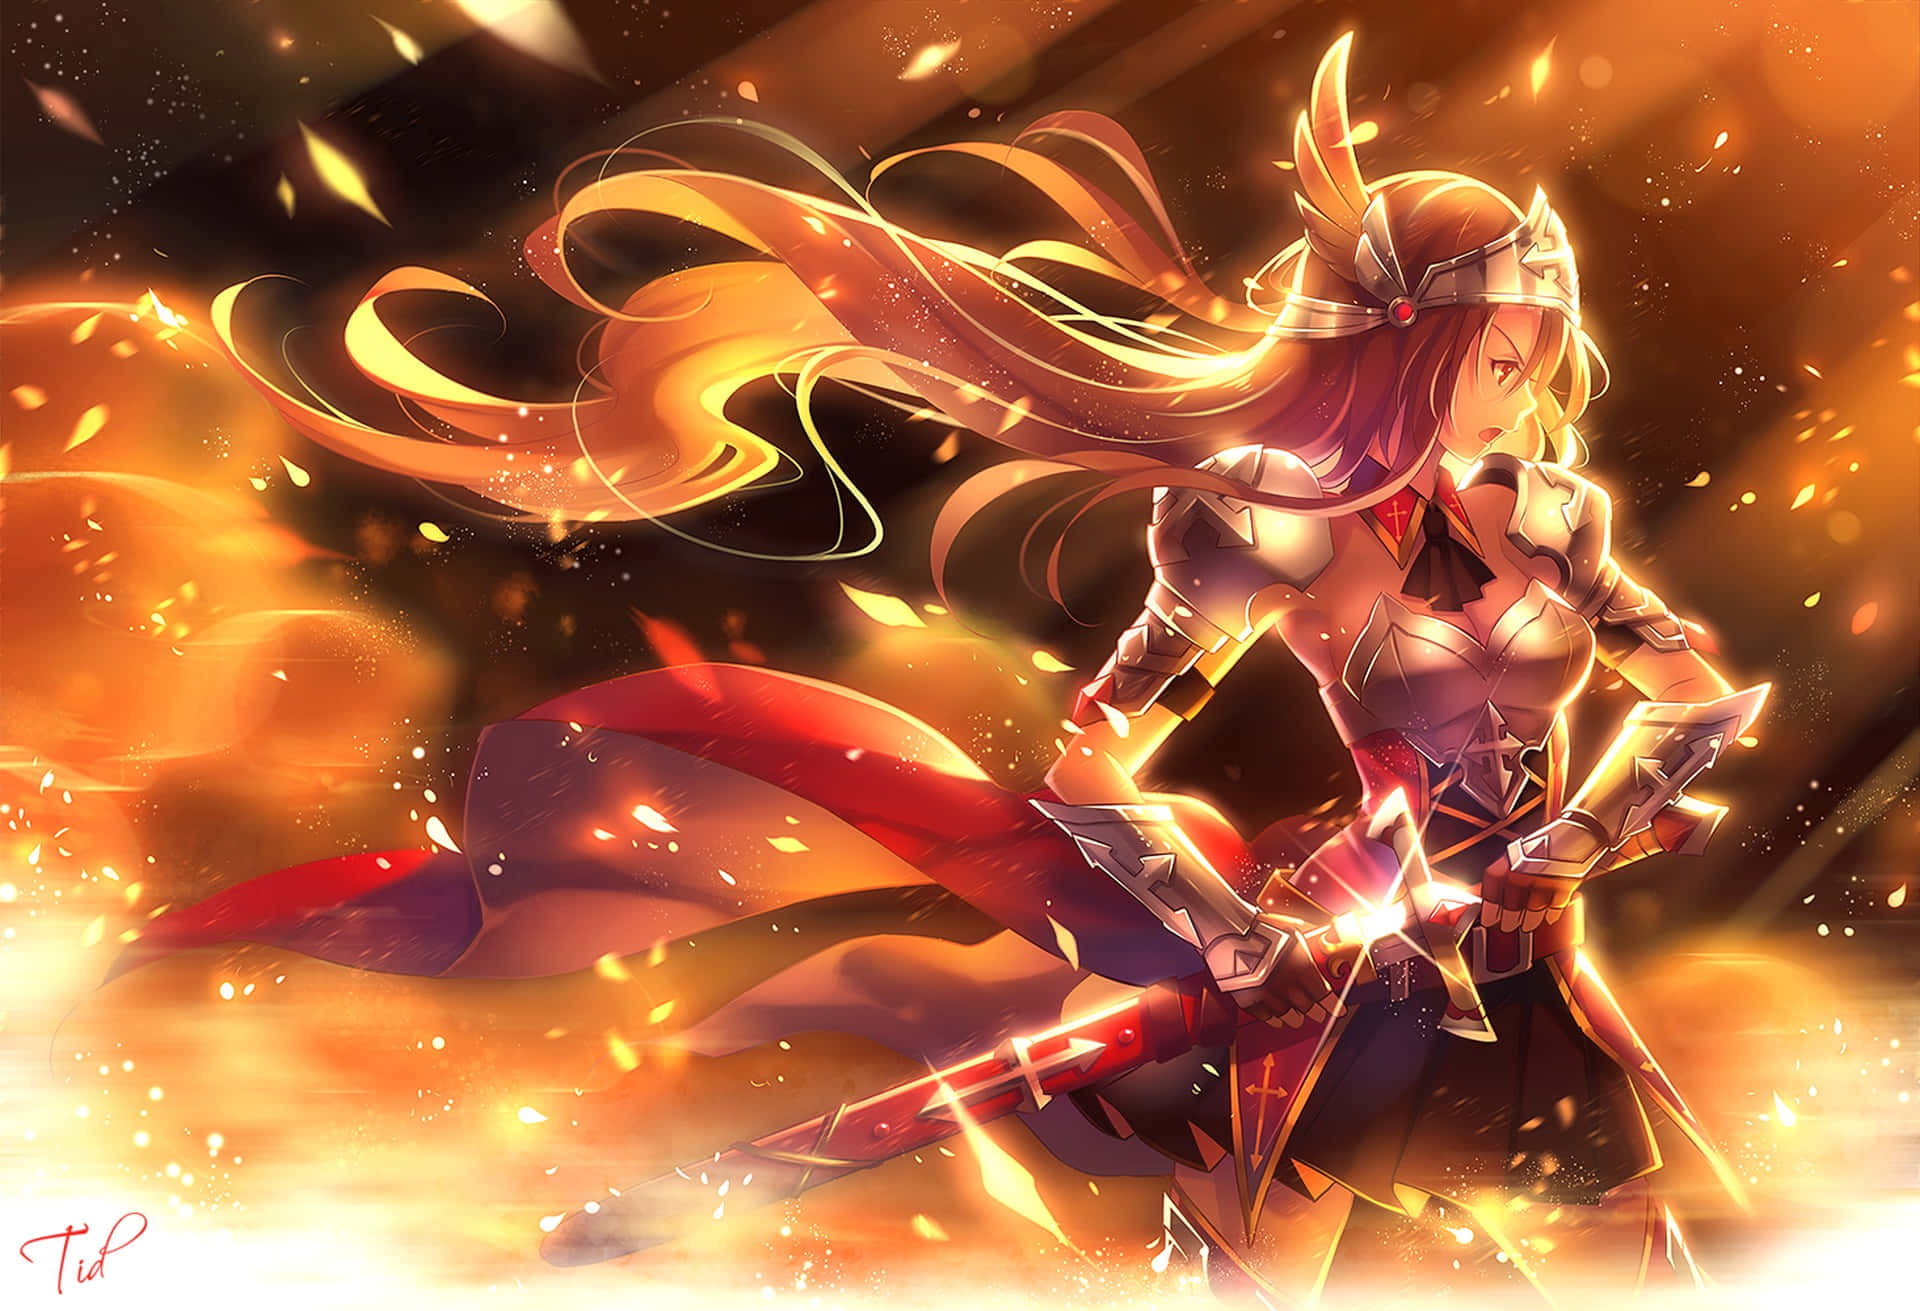 Admire the awesome beauty of Anime Fire Wallpaper